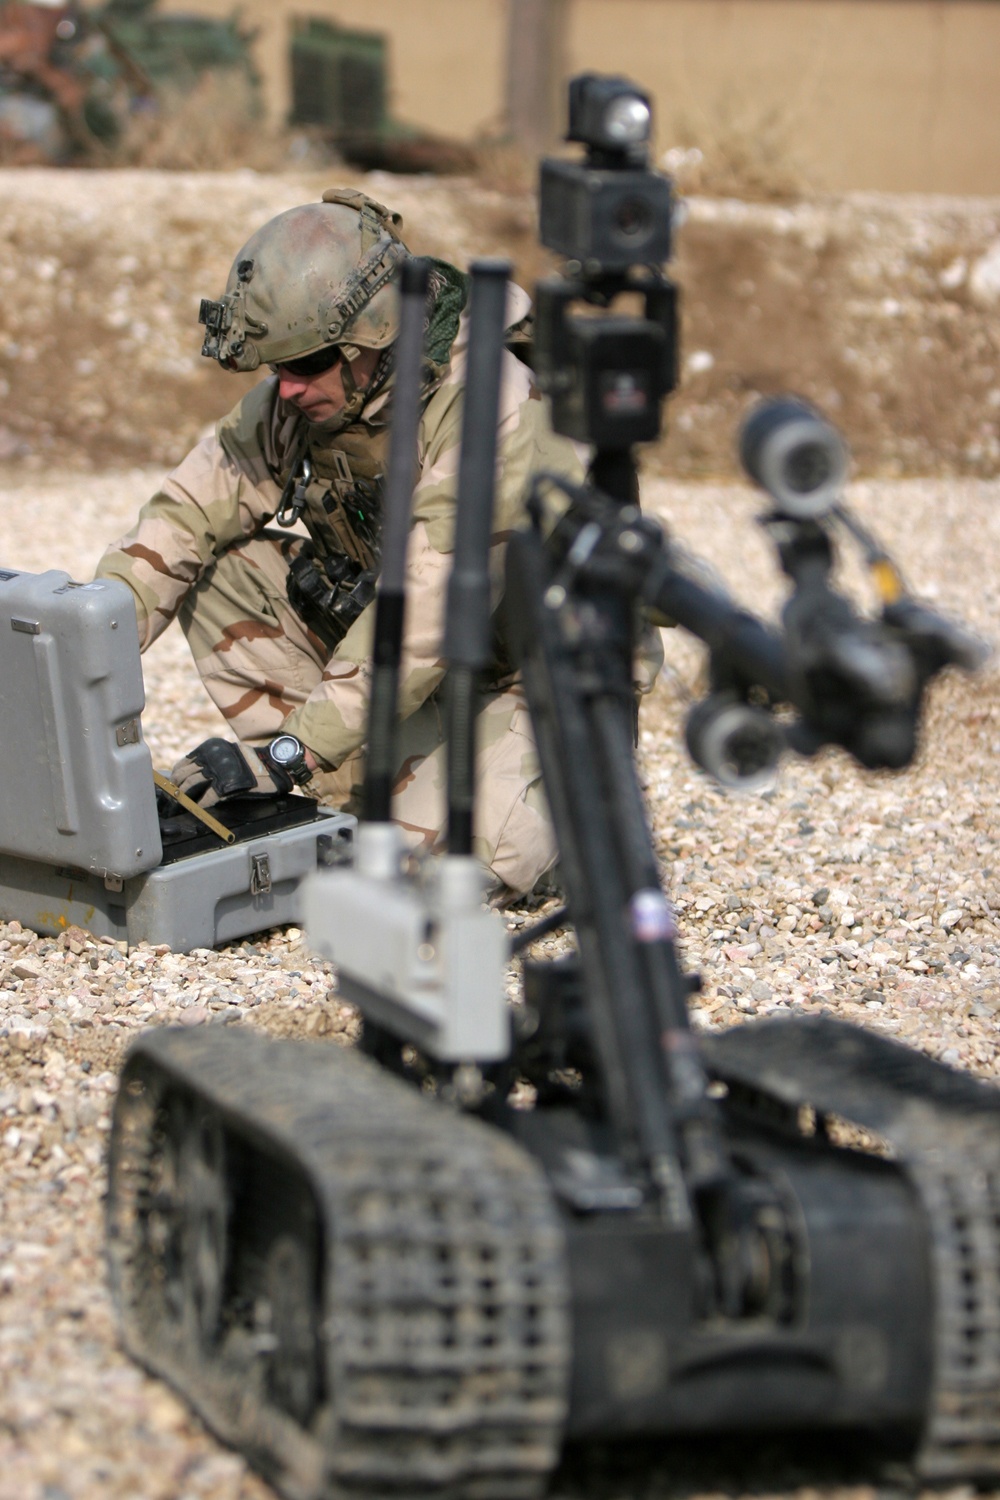 A US Navy EOD technician demonstrates the capabilities of their remote-controlled robot, used for inspecting IEDs